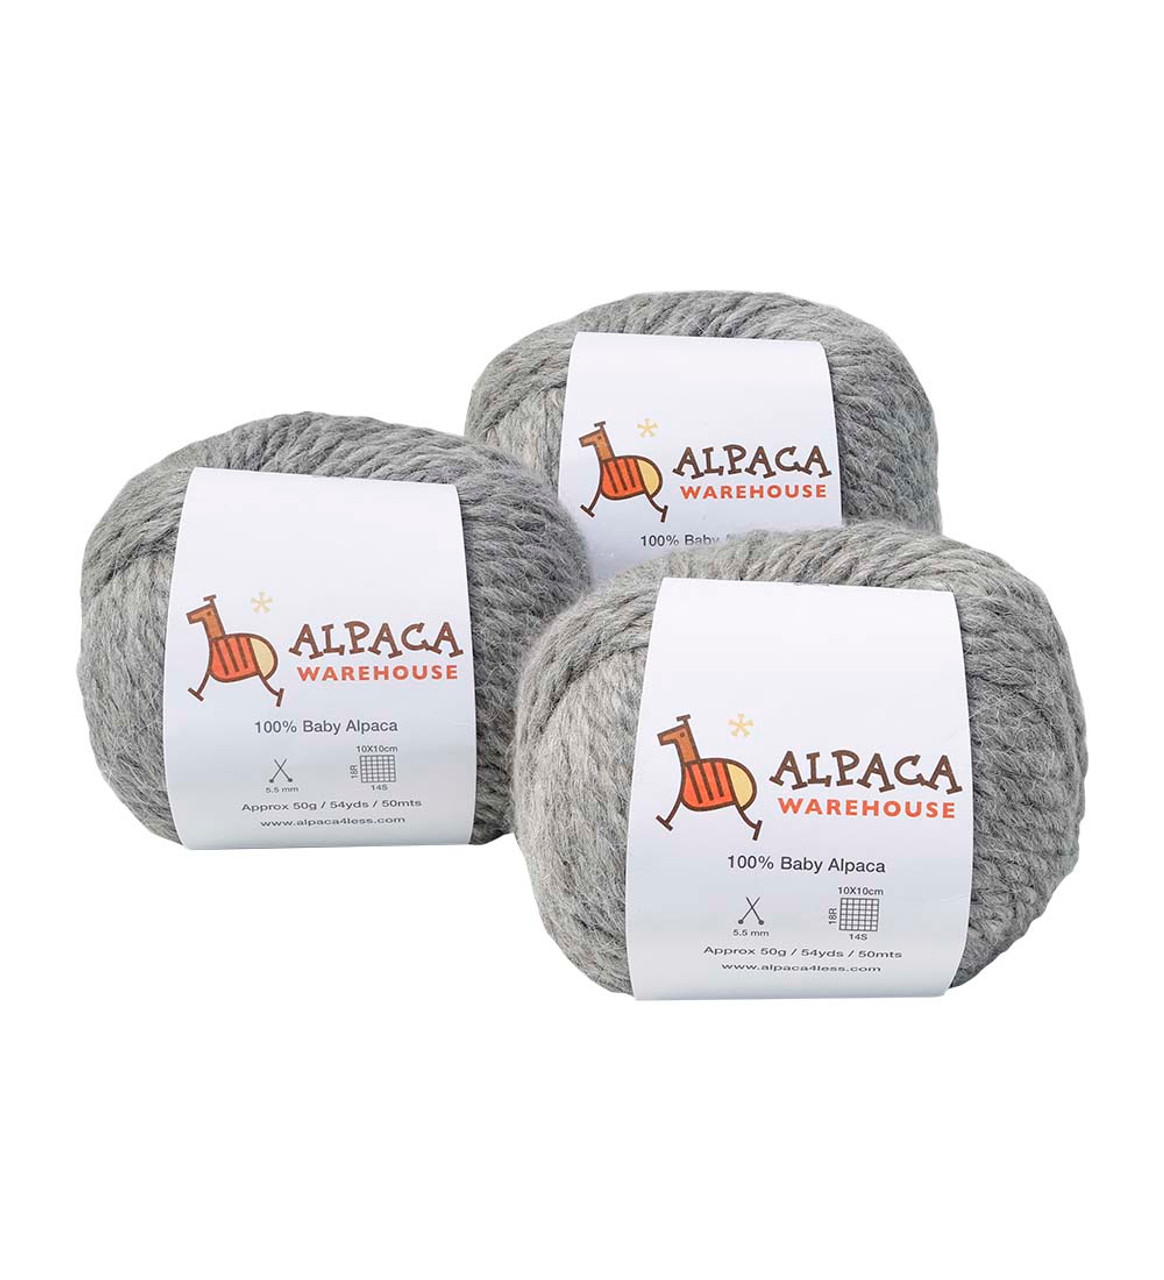 100% Baby Alpaca Yarn Wool Set of 3 Skeins Bulky Chunky Weight - Heavenly Soft and Perfect for Knitting and Crocheting (Soft Gray)